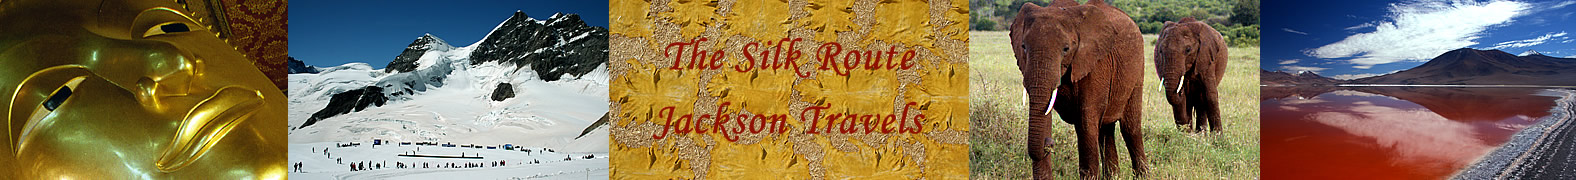 The Silk Route Jackson Travels